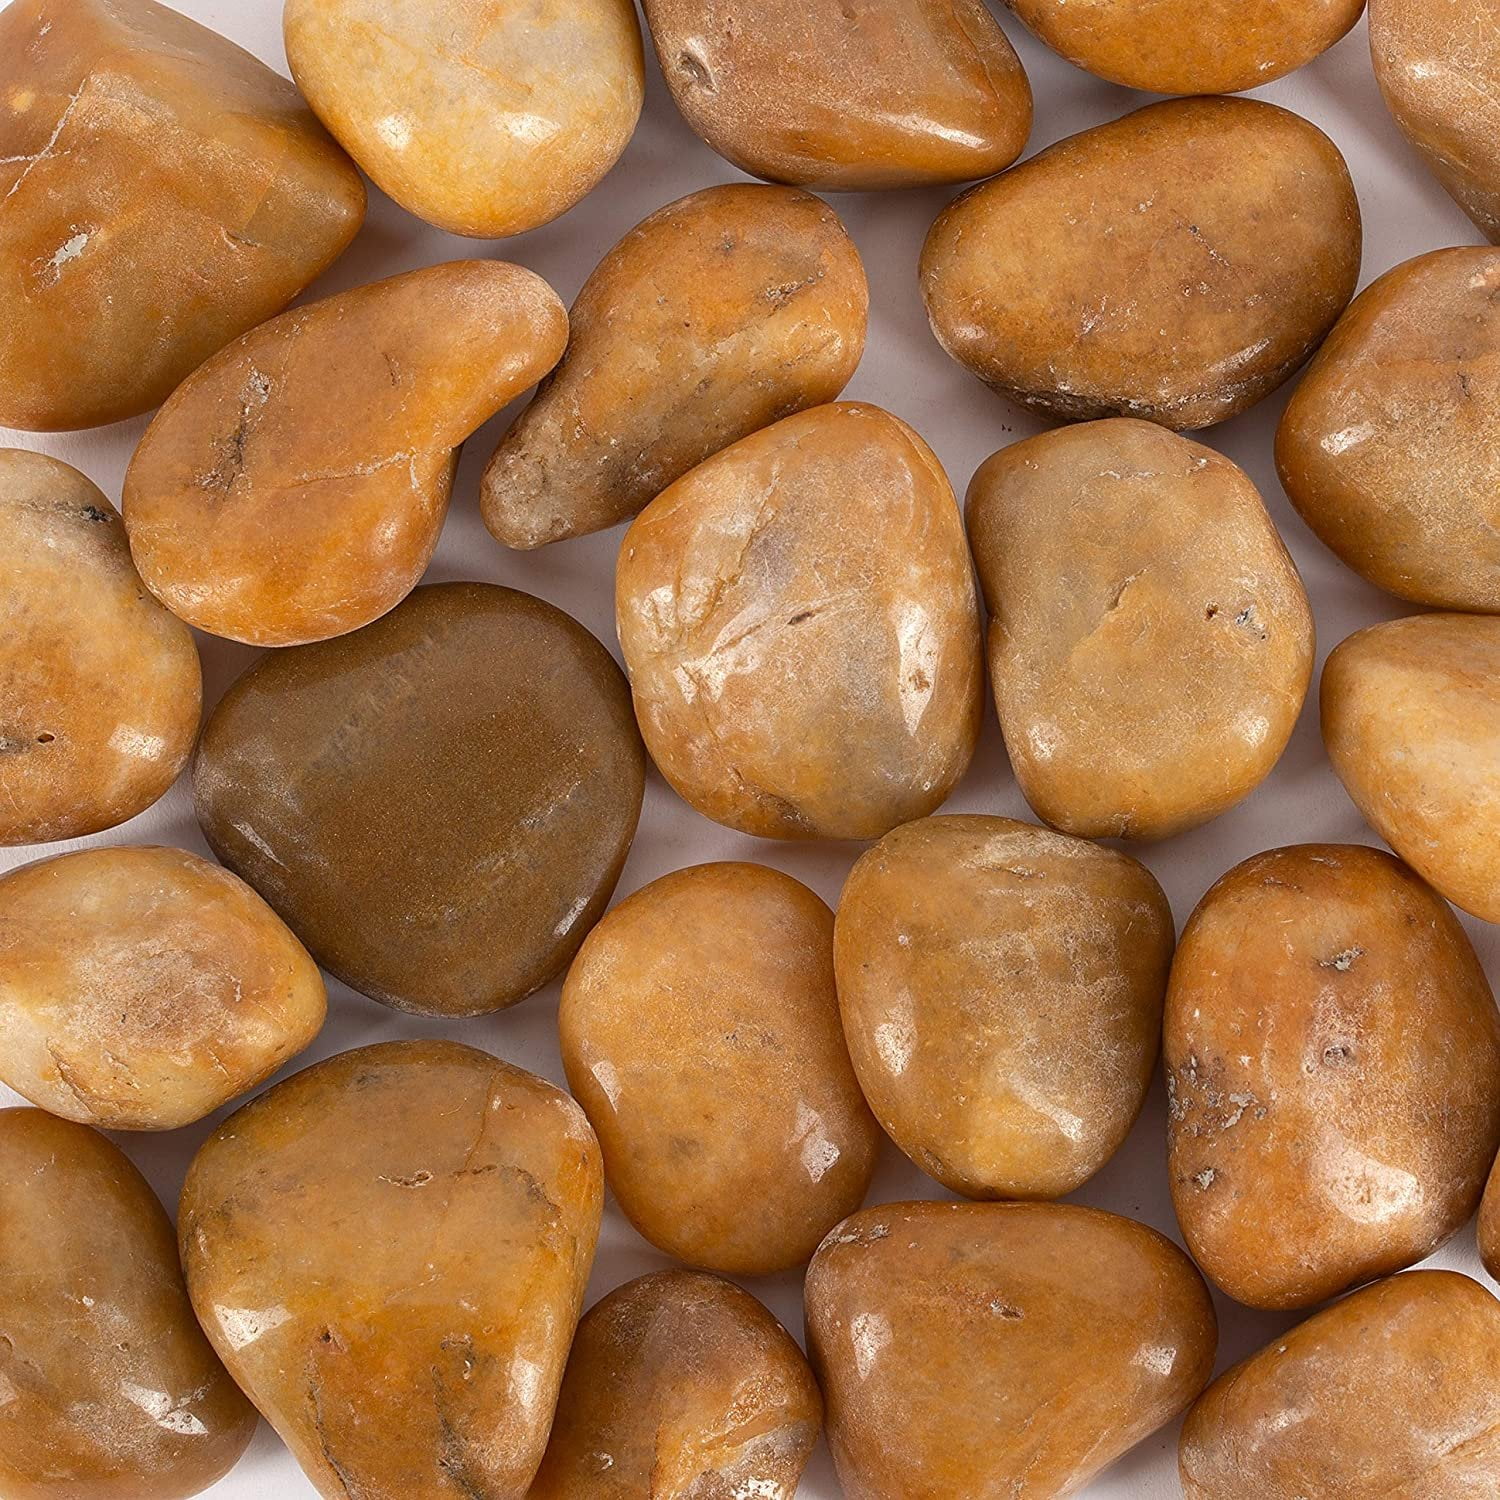 Craft Rocks for Painting, 100% Natural River Stones, 2”-3.5” Inch, Set of  14